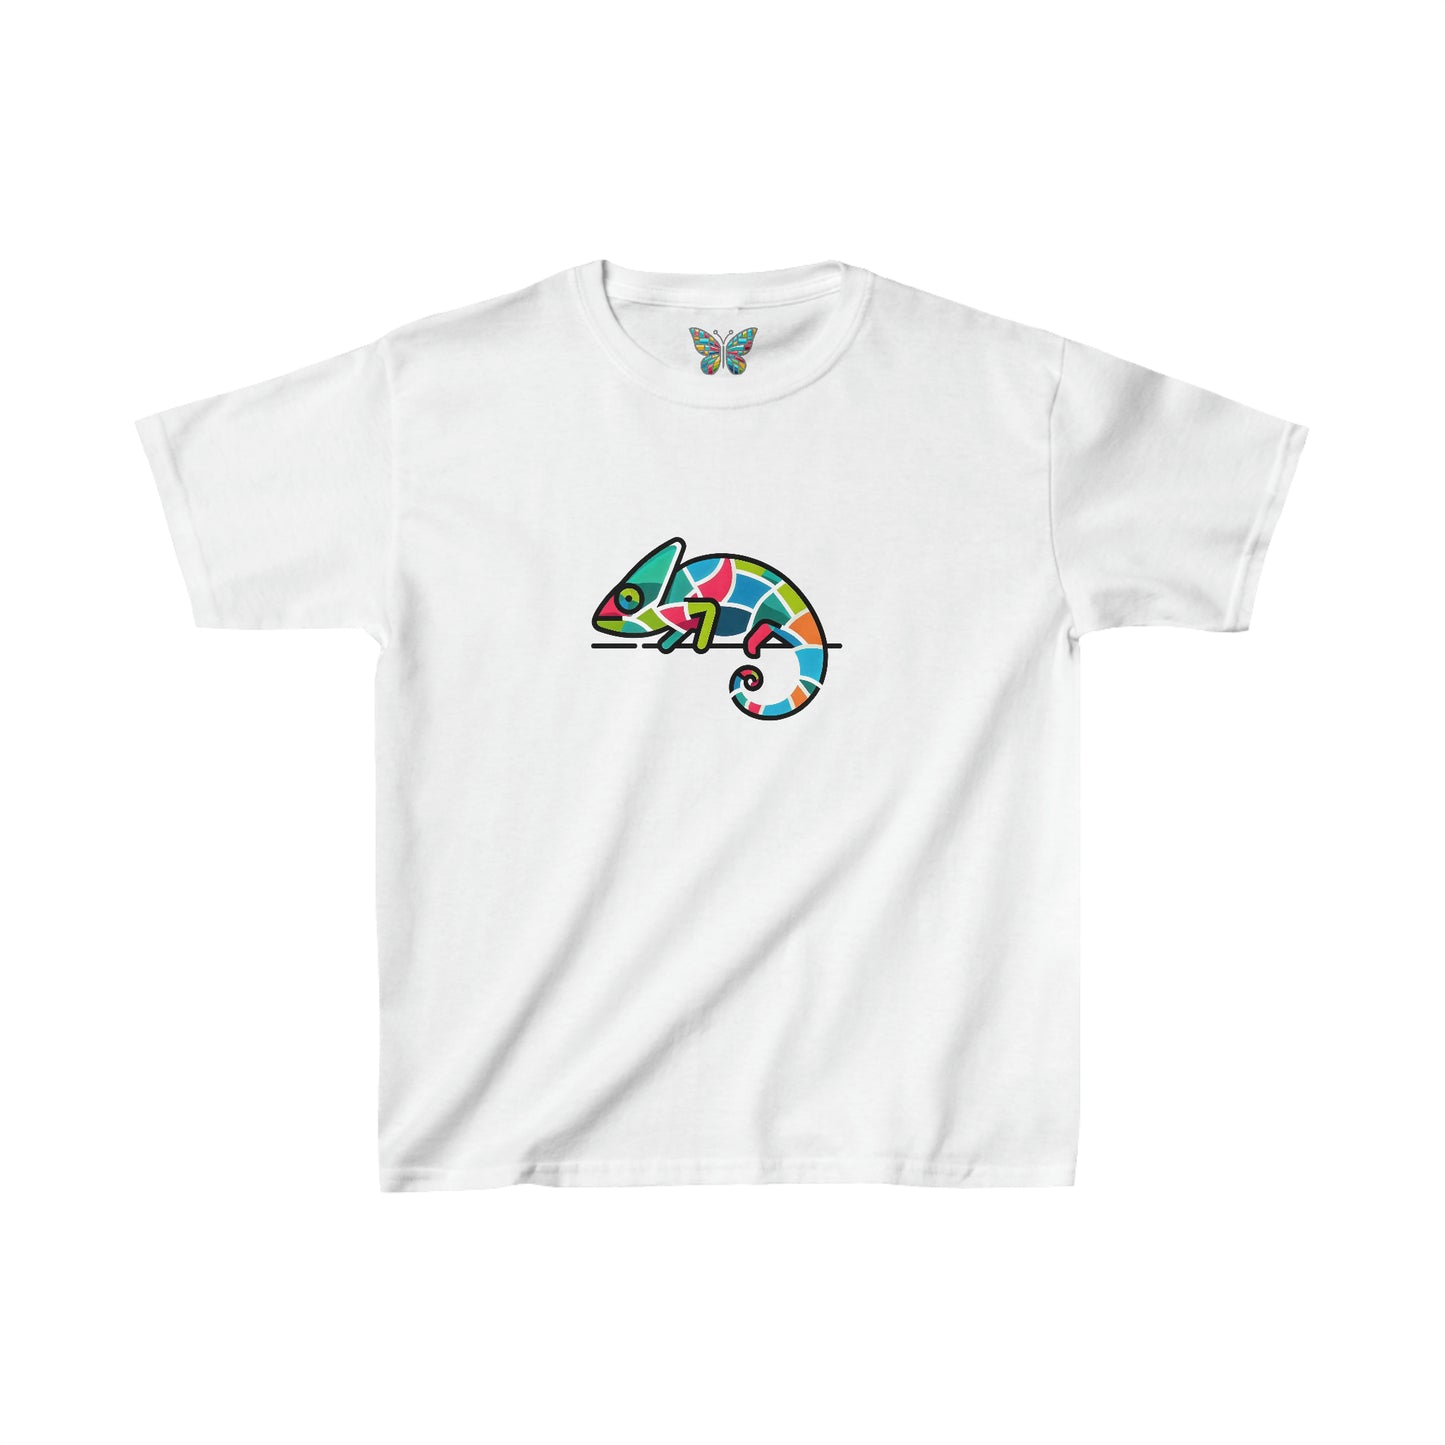 Chameleon Mosaquility - Youth - Snazzle Tee